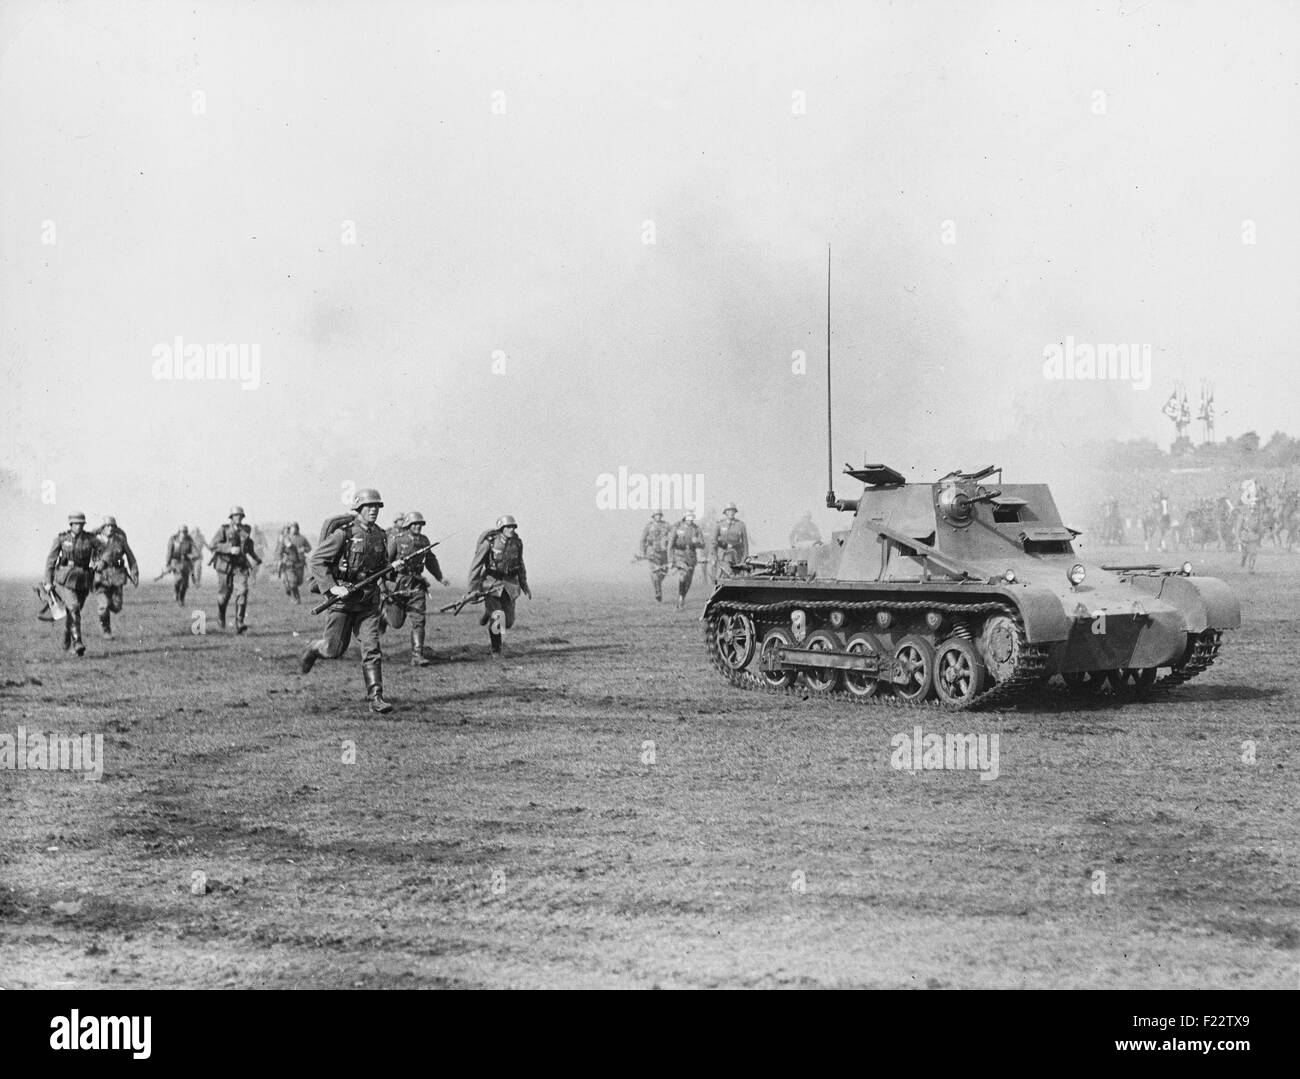 On the day of the Wehrmacht on the Nuremberg Rally in Nuremberg soldiers present an attack on the Zeppelin Field, with the help of tanks. The tank is a Panzer I conducting as Panzerbefehlswagen ('small armored command vehicle'). Stock Photo